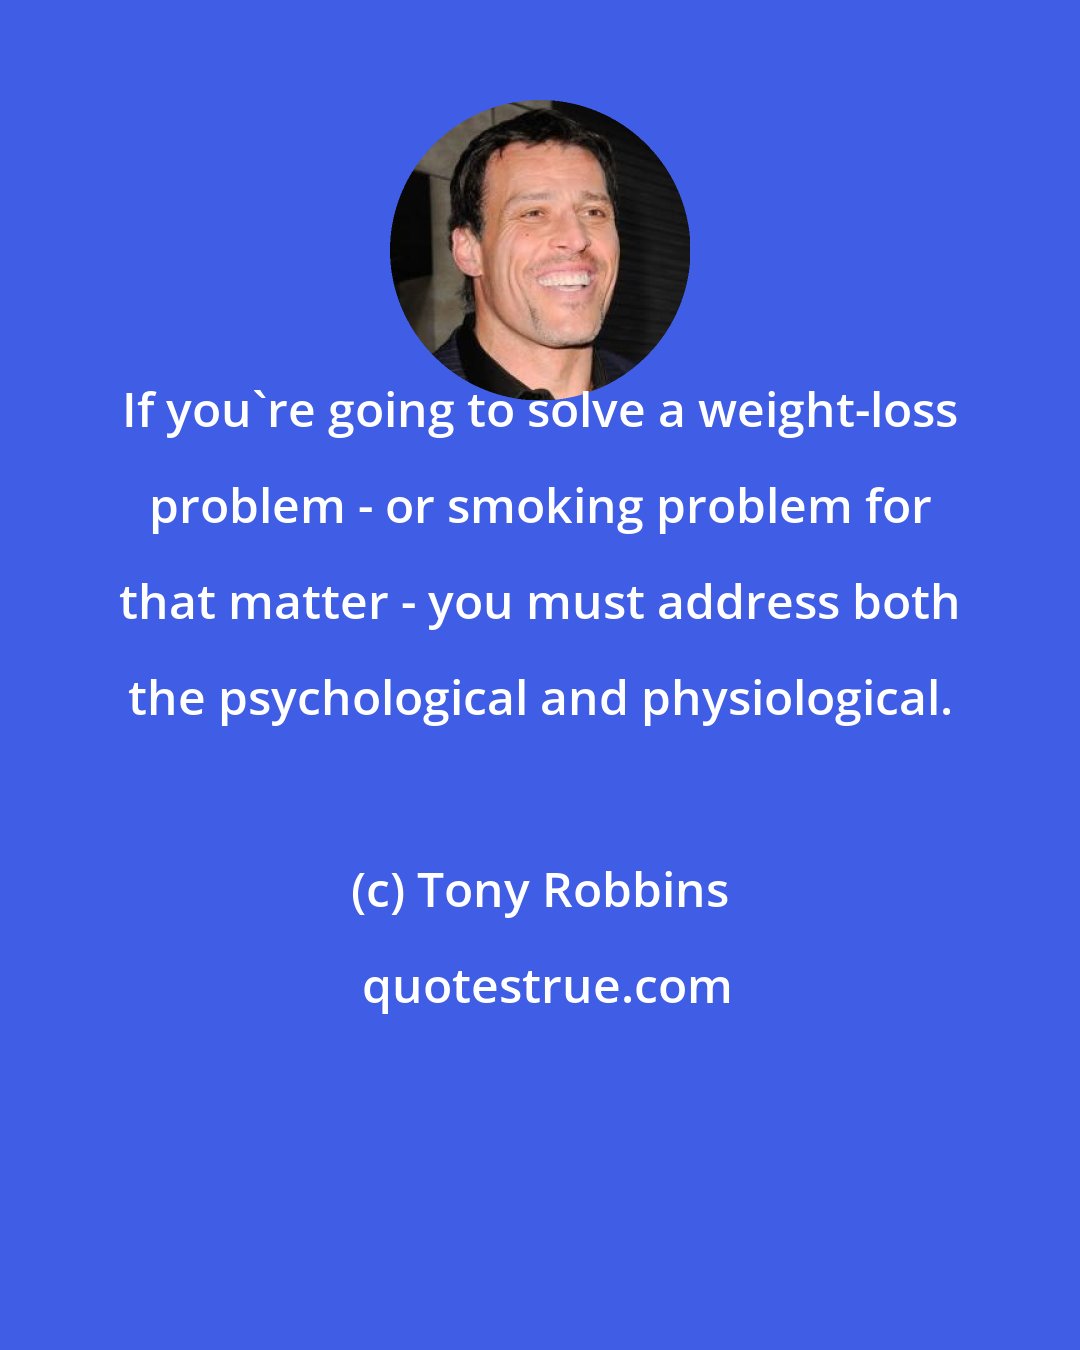 Tony Robbins: If you're going to solve a weight-loss problem - or smoking problem for that matter - you must address both the psychological and physiological.